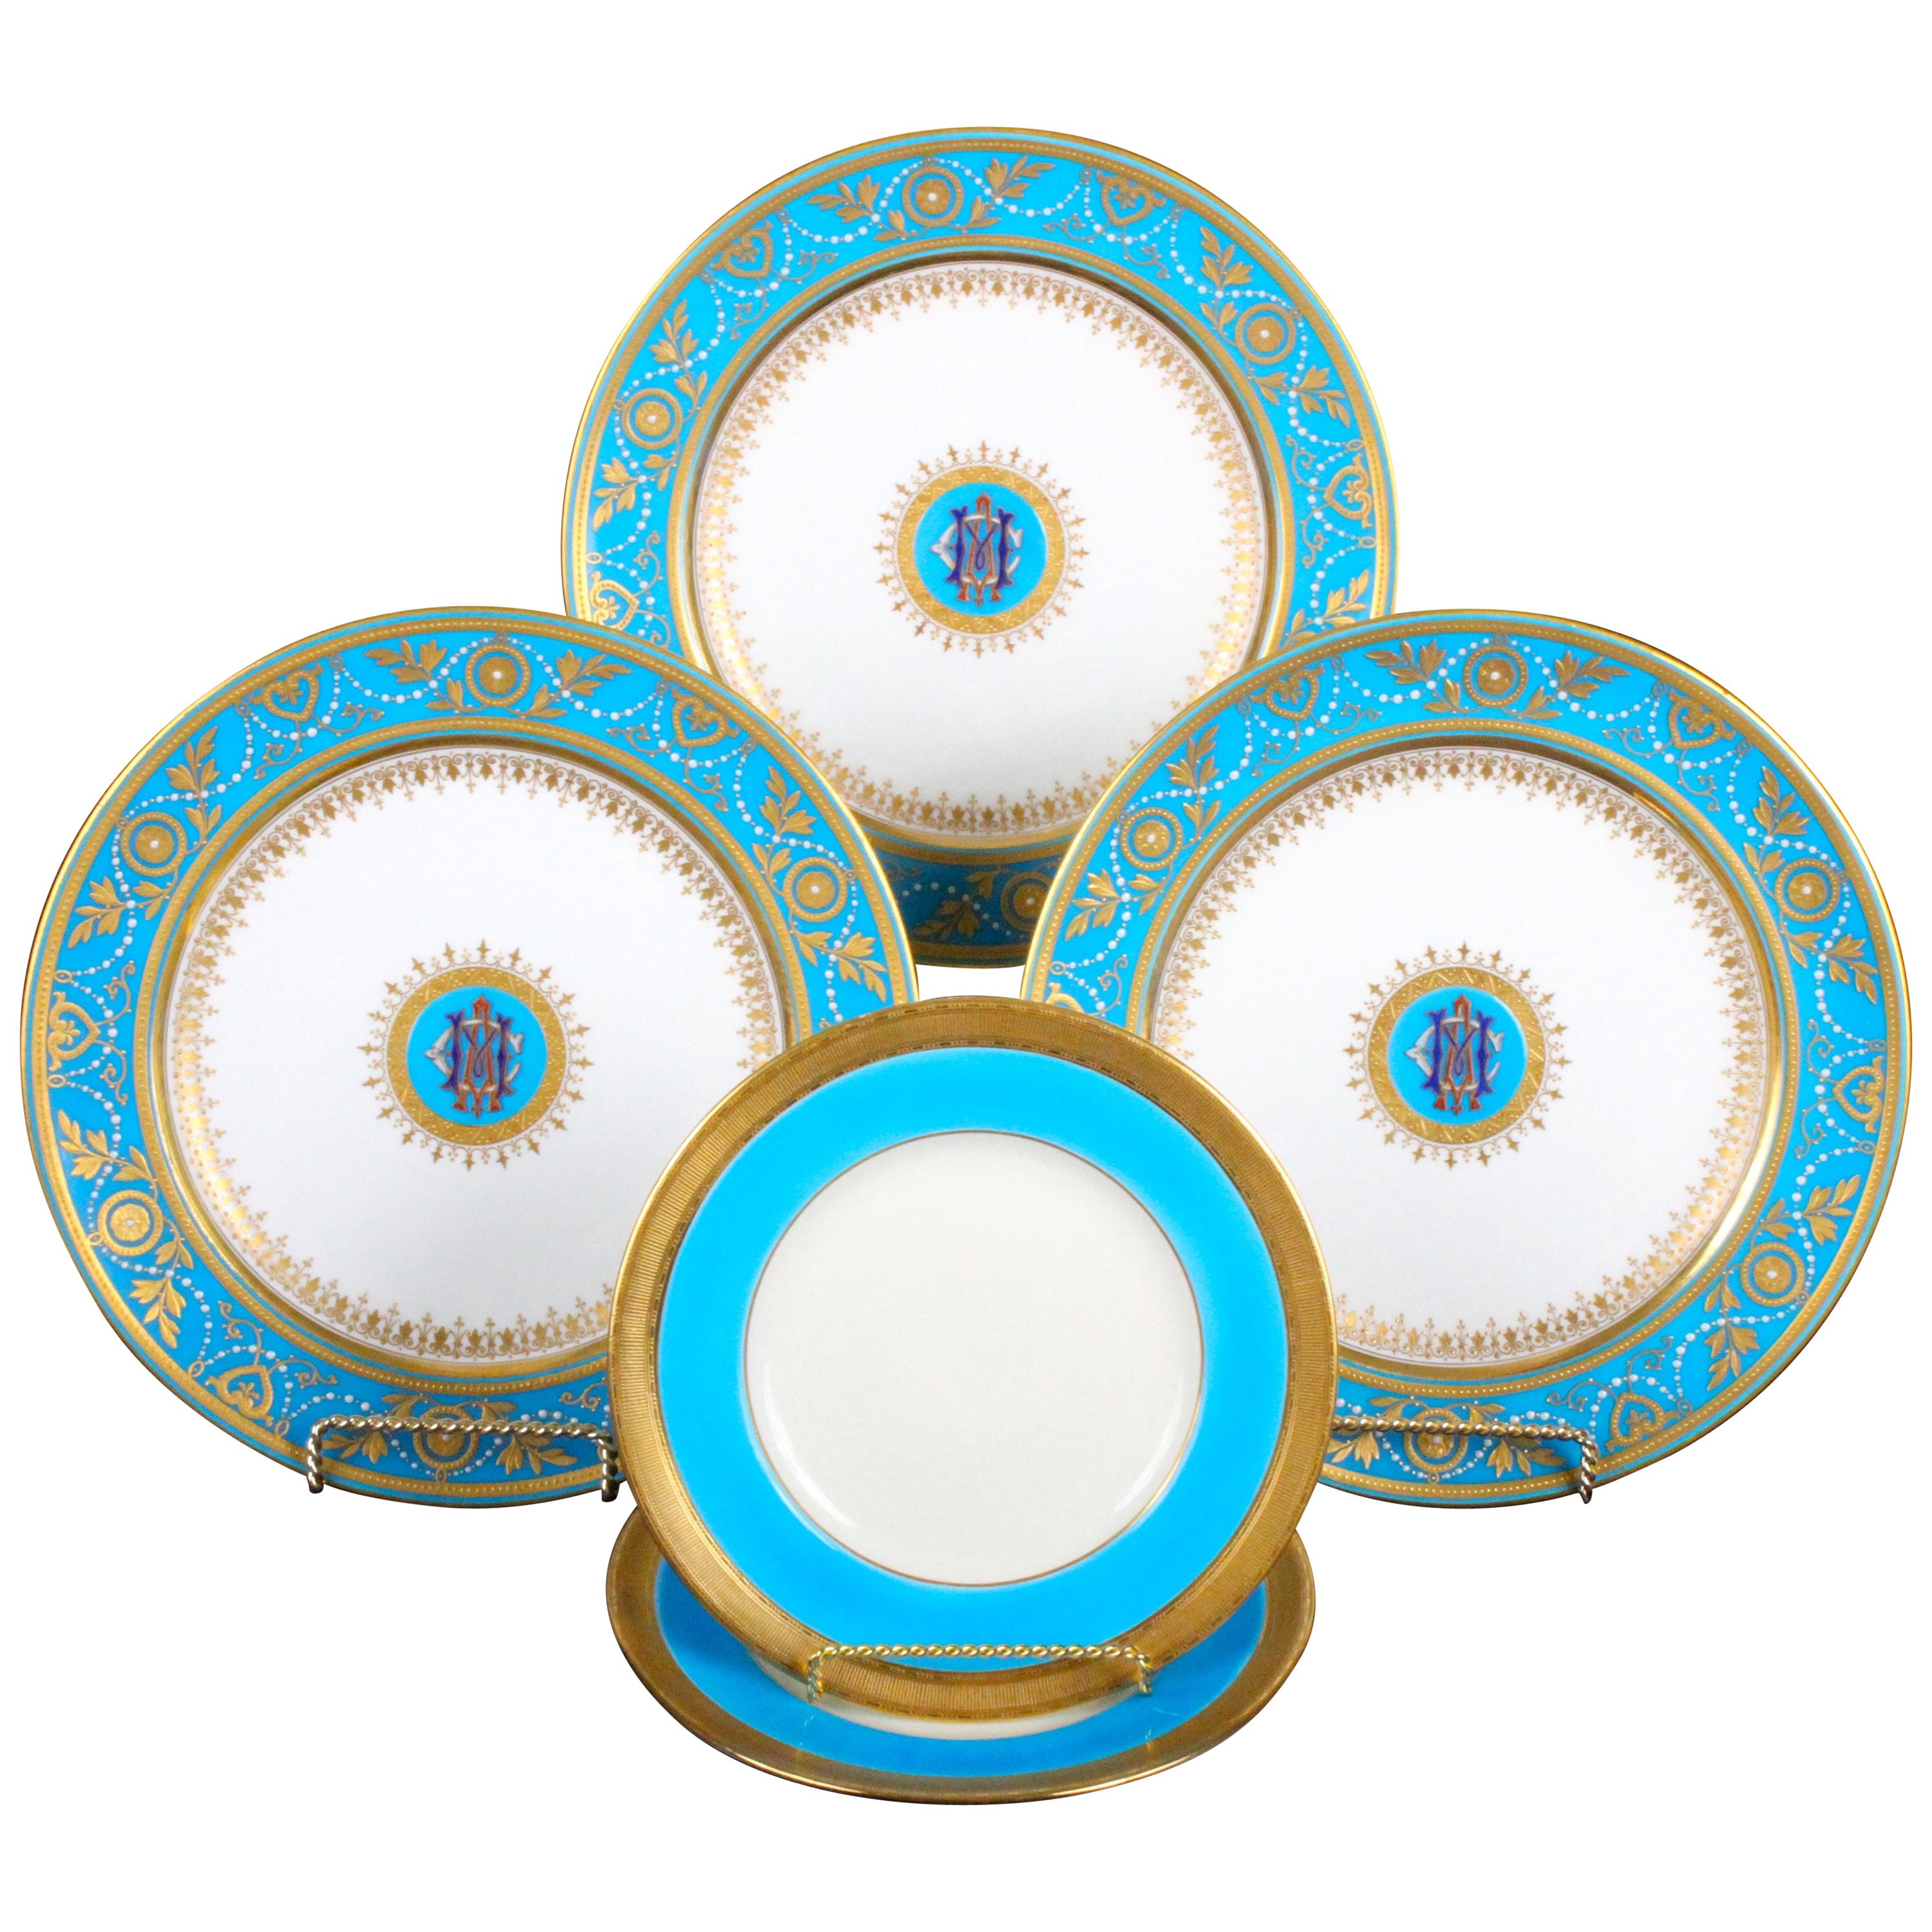 Service of Minton Turquoise and Gold Monogrammed Plates with Side Plates For Sale